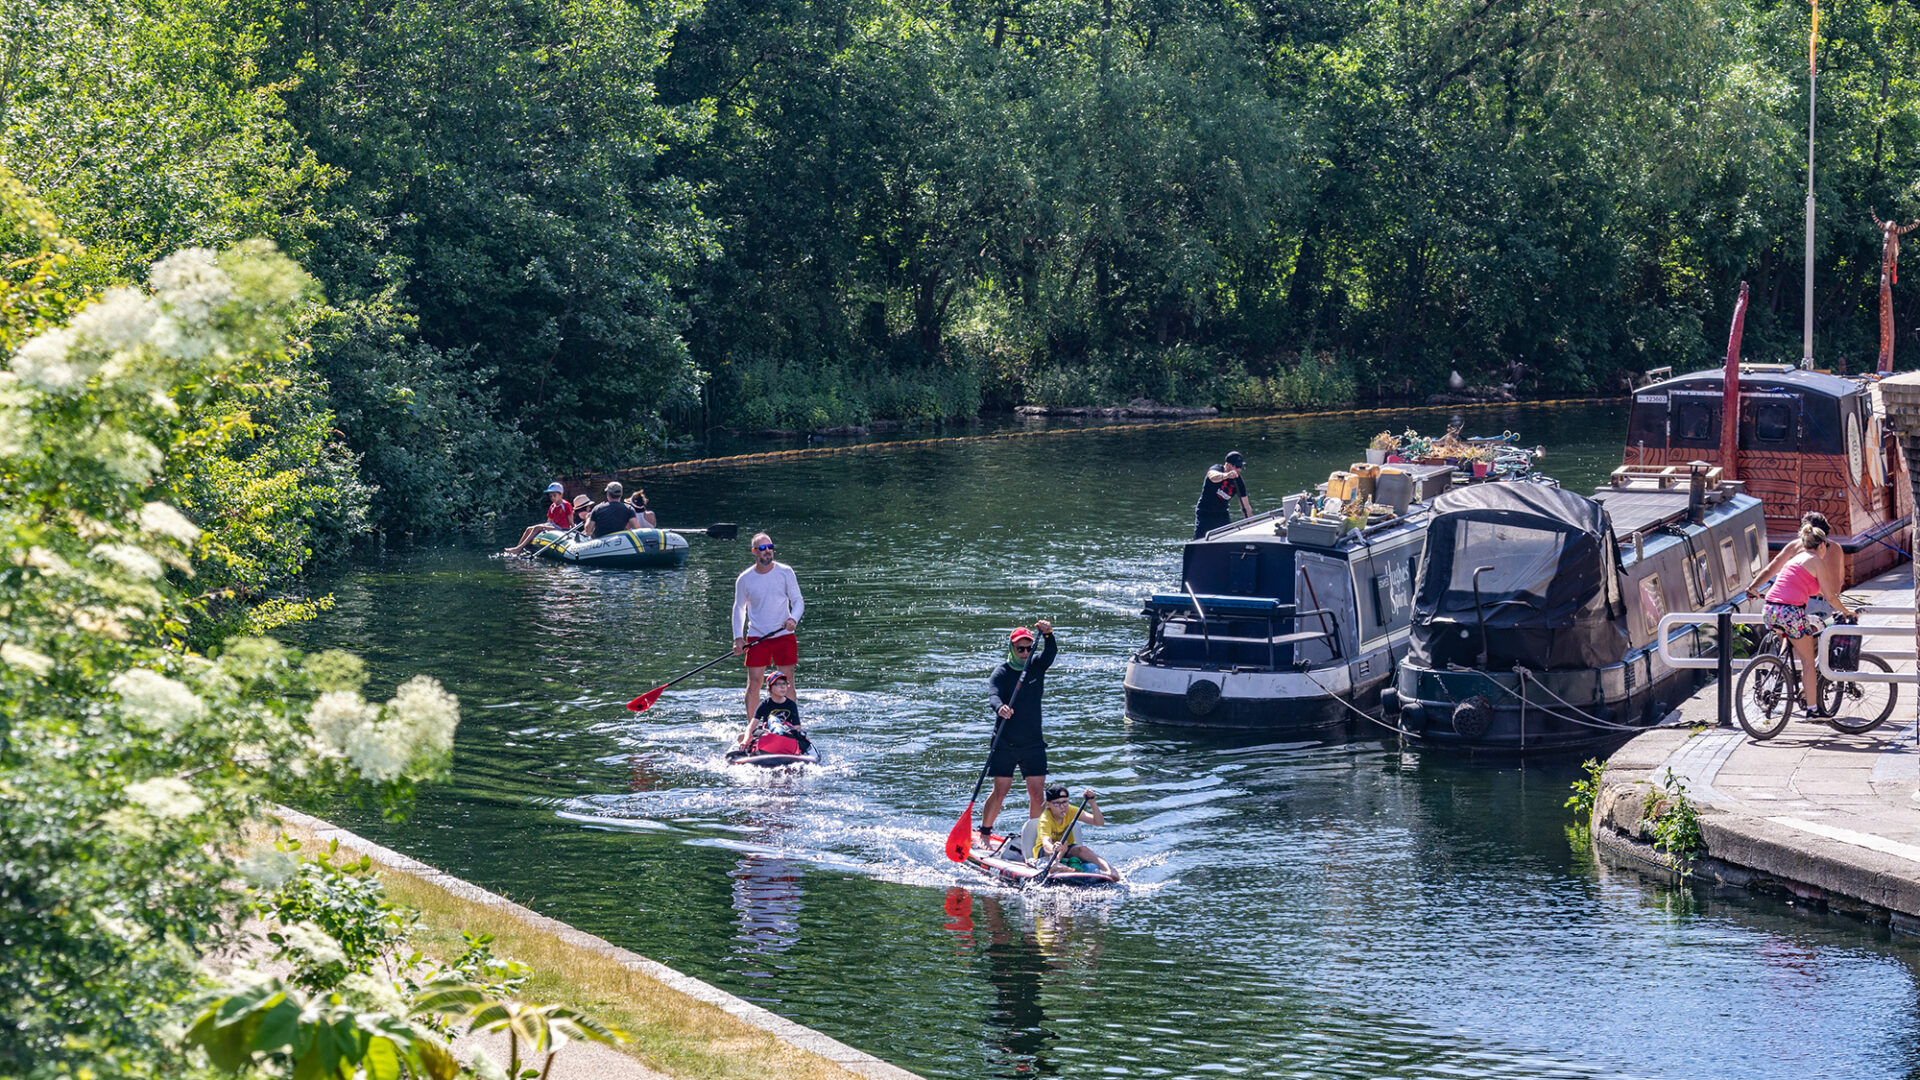 Paddle boarding on the Regents Canal at King's Cross